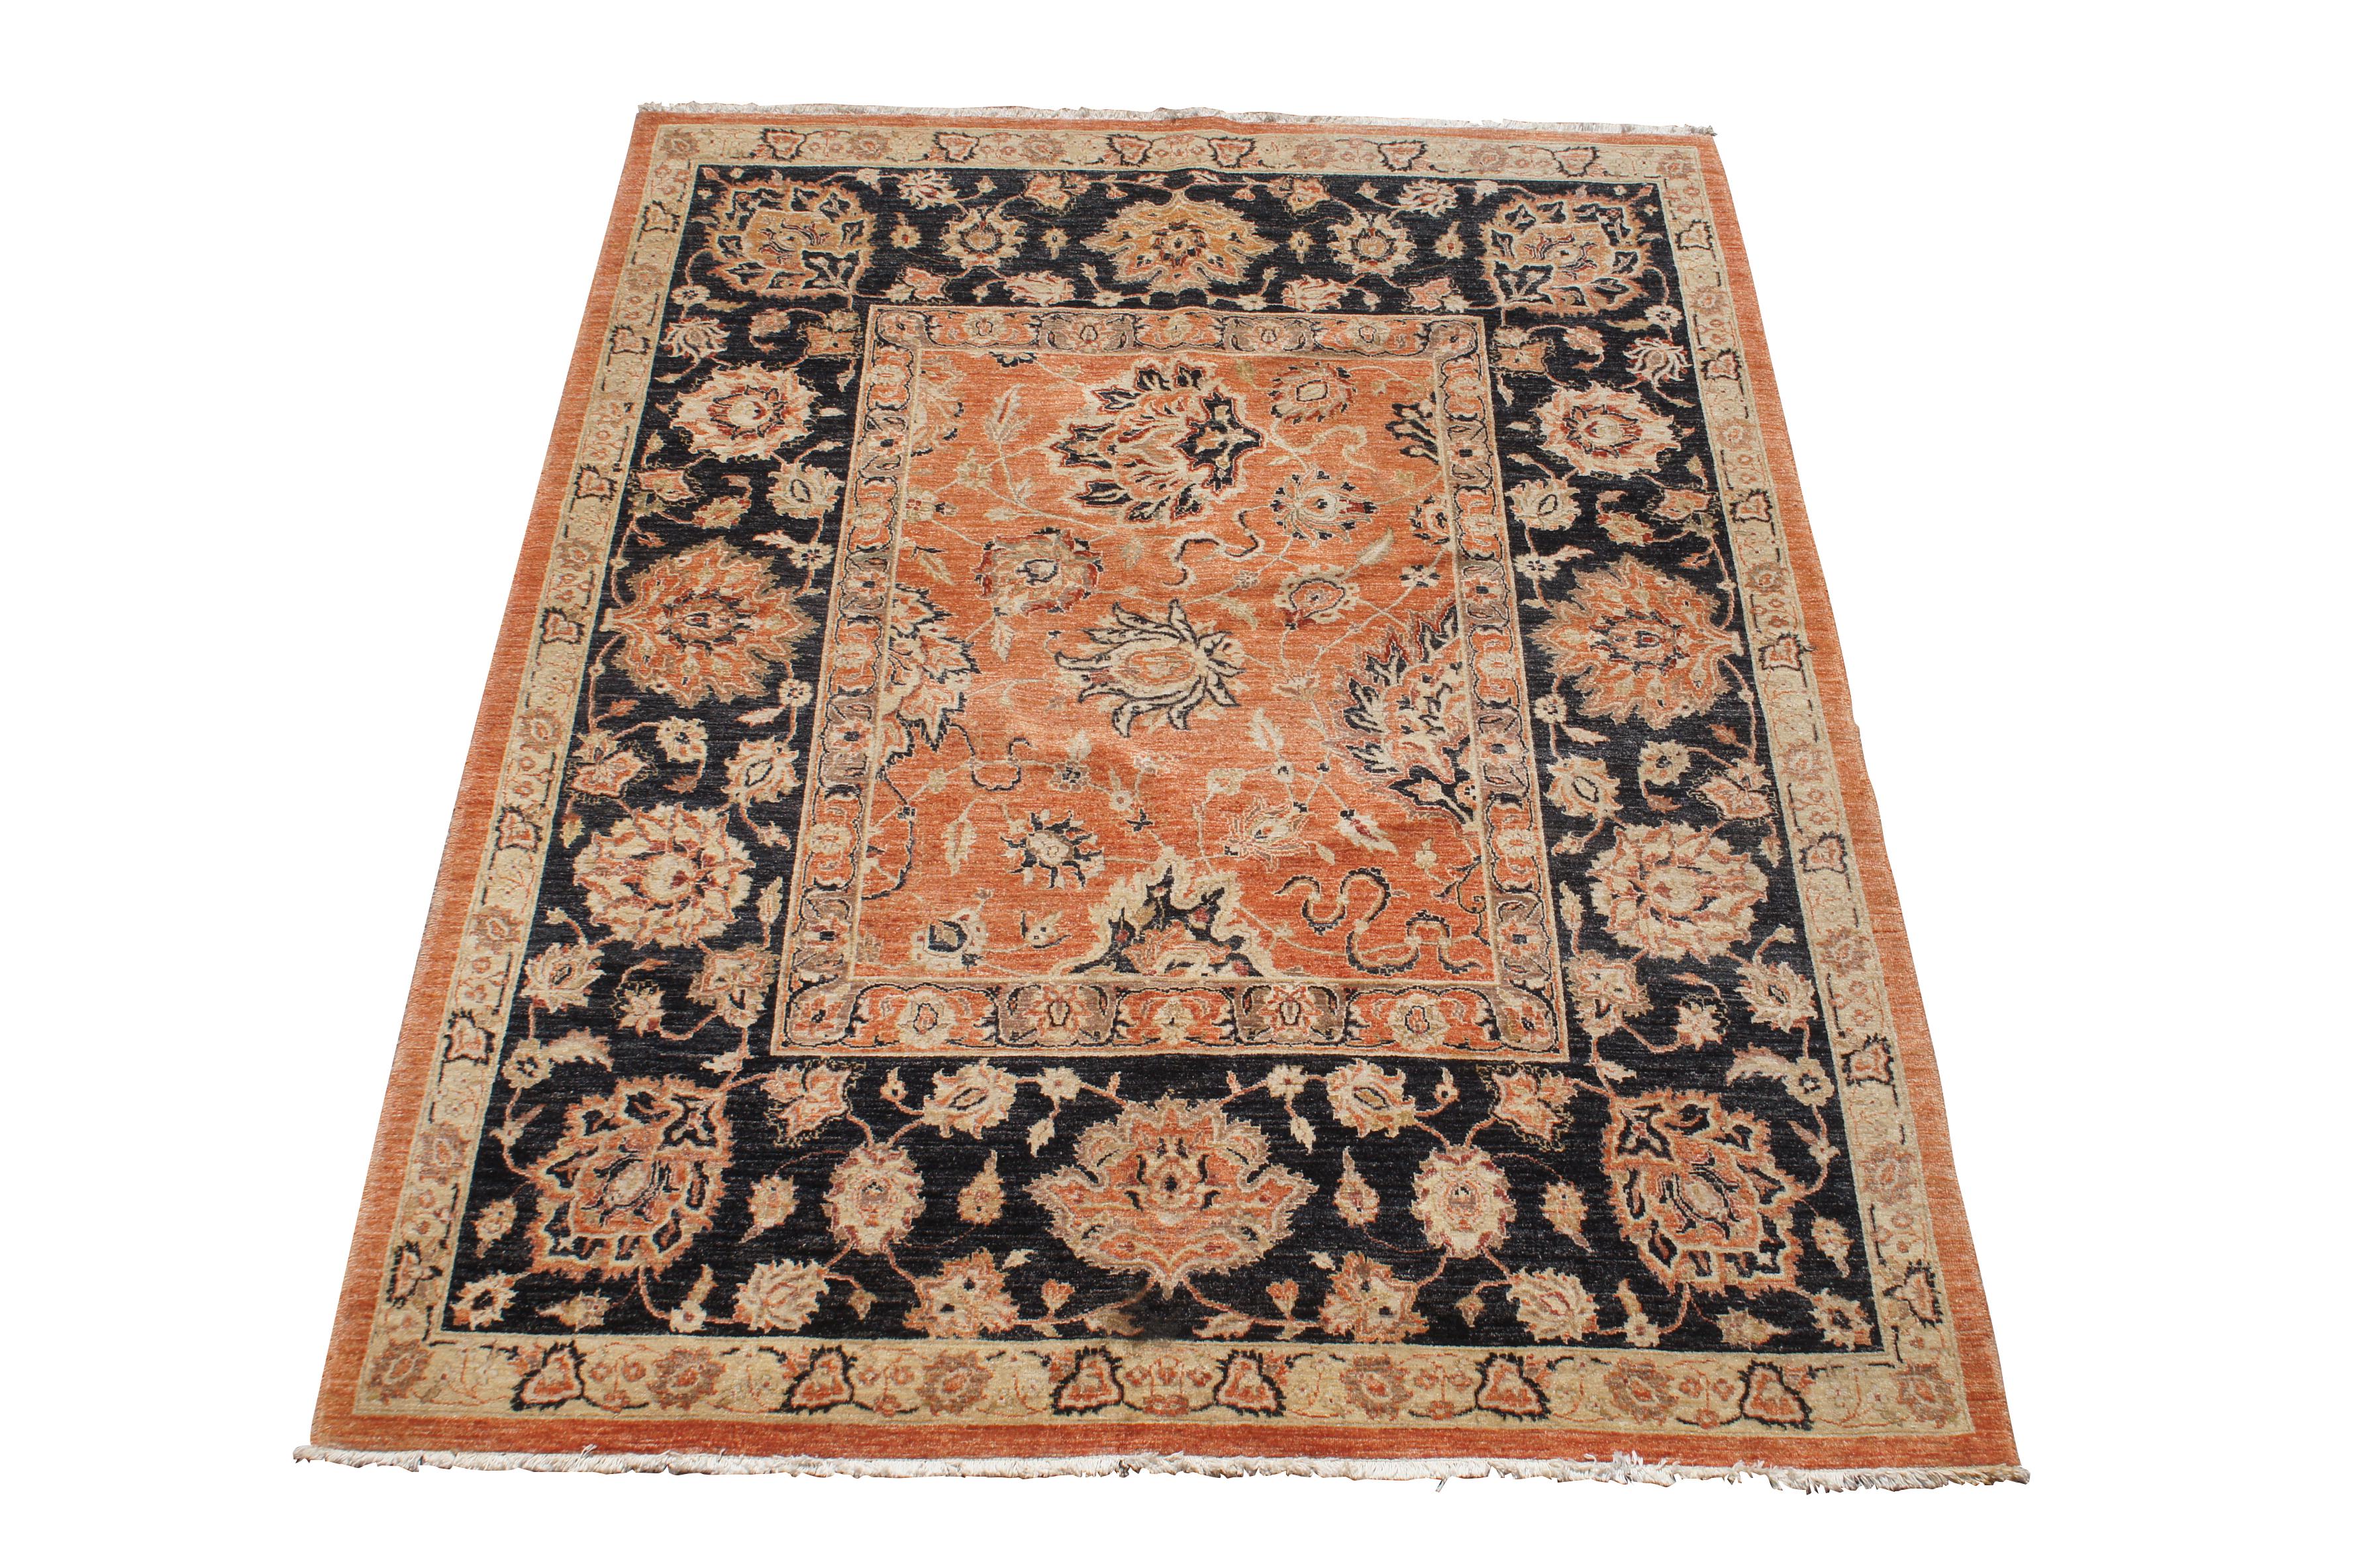 Exceptional hand knotted oriental area rug.  Features a floral pattern with large sprays in orange, beige and very dark blue/ black

Peshawar rugs are handmade rugs from northwestern Pakistan that feature traditional Persian and Turkish Oushak style